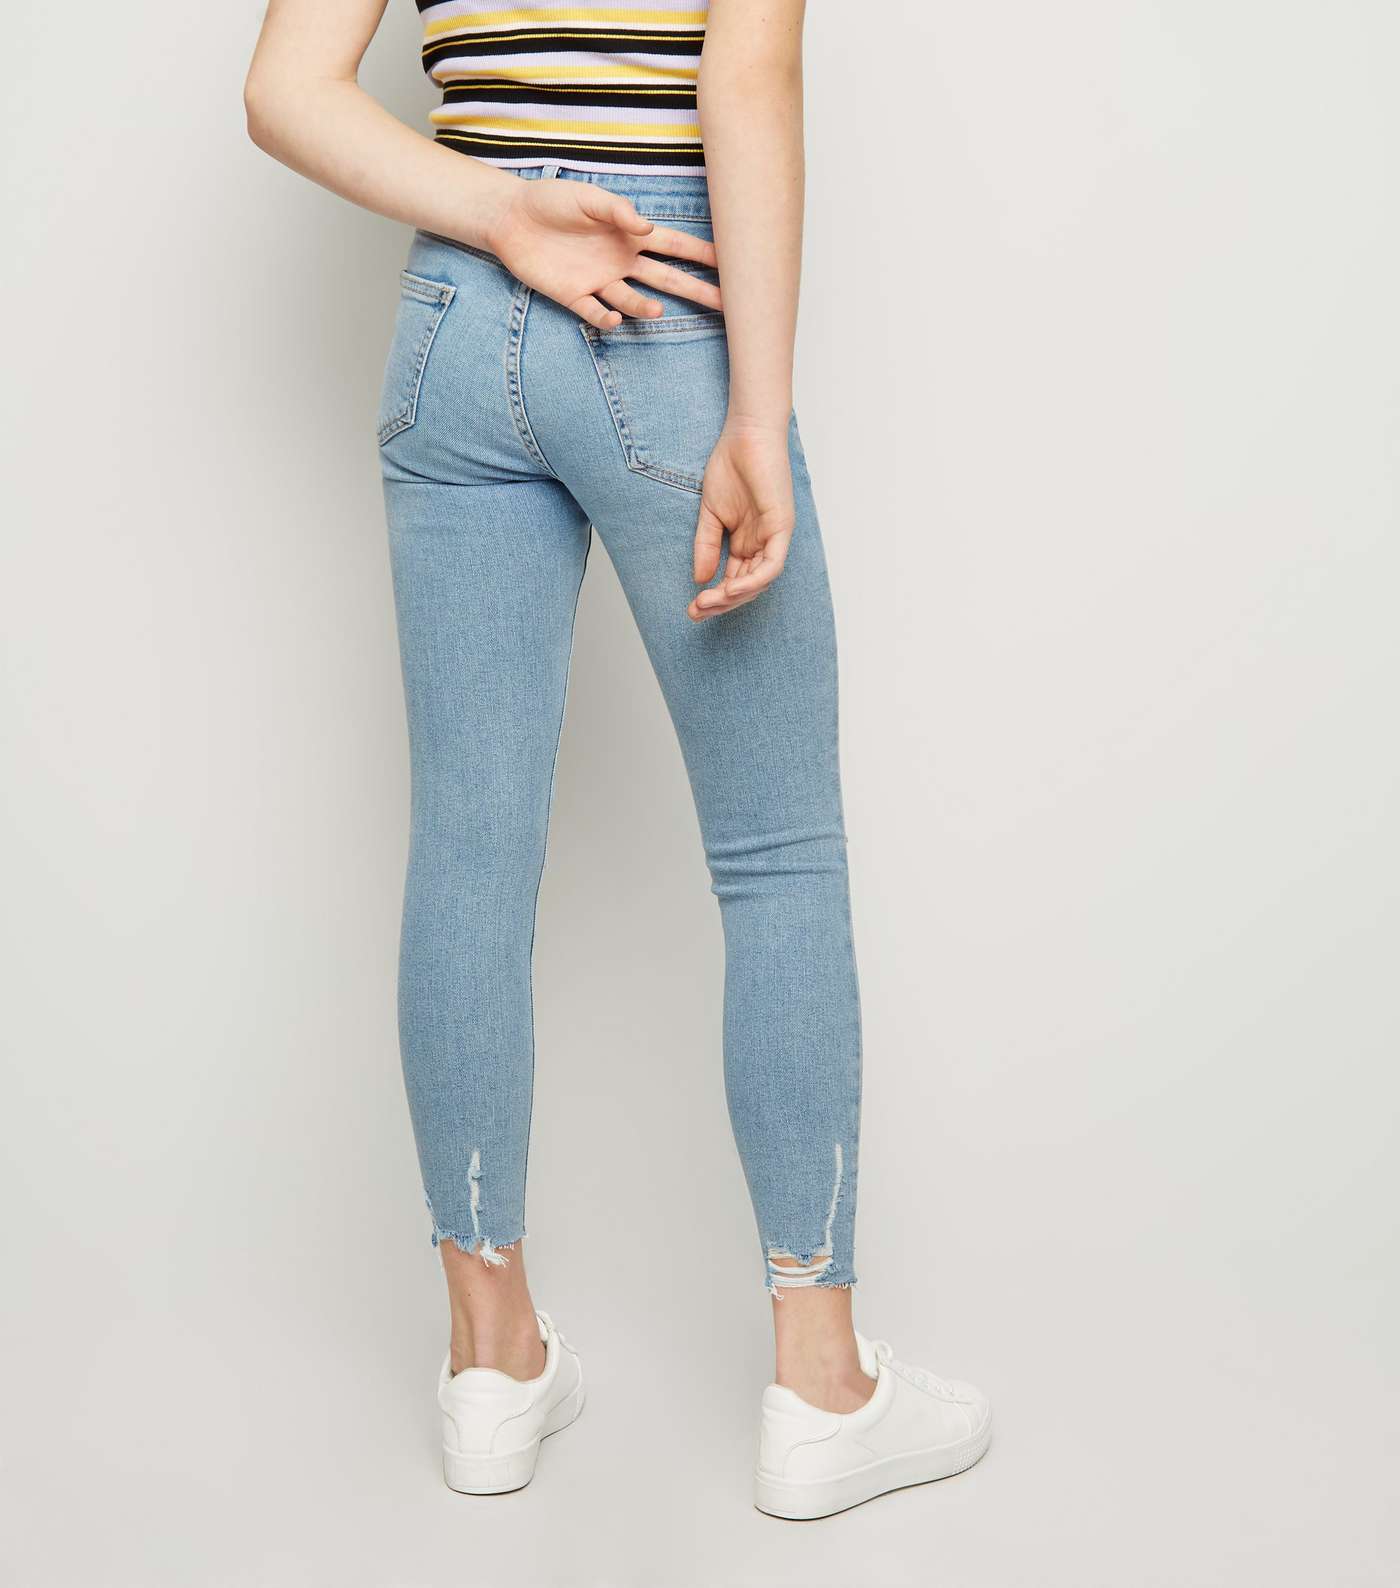 Girls Pale Blue Ripped High Waist Skinny Jeans  Image 5